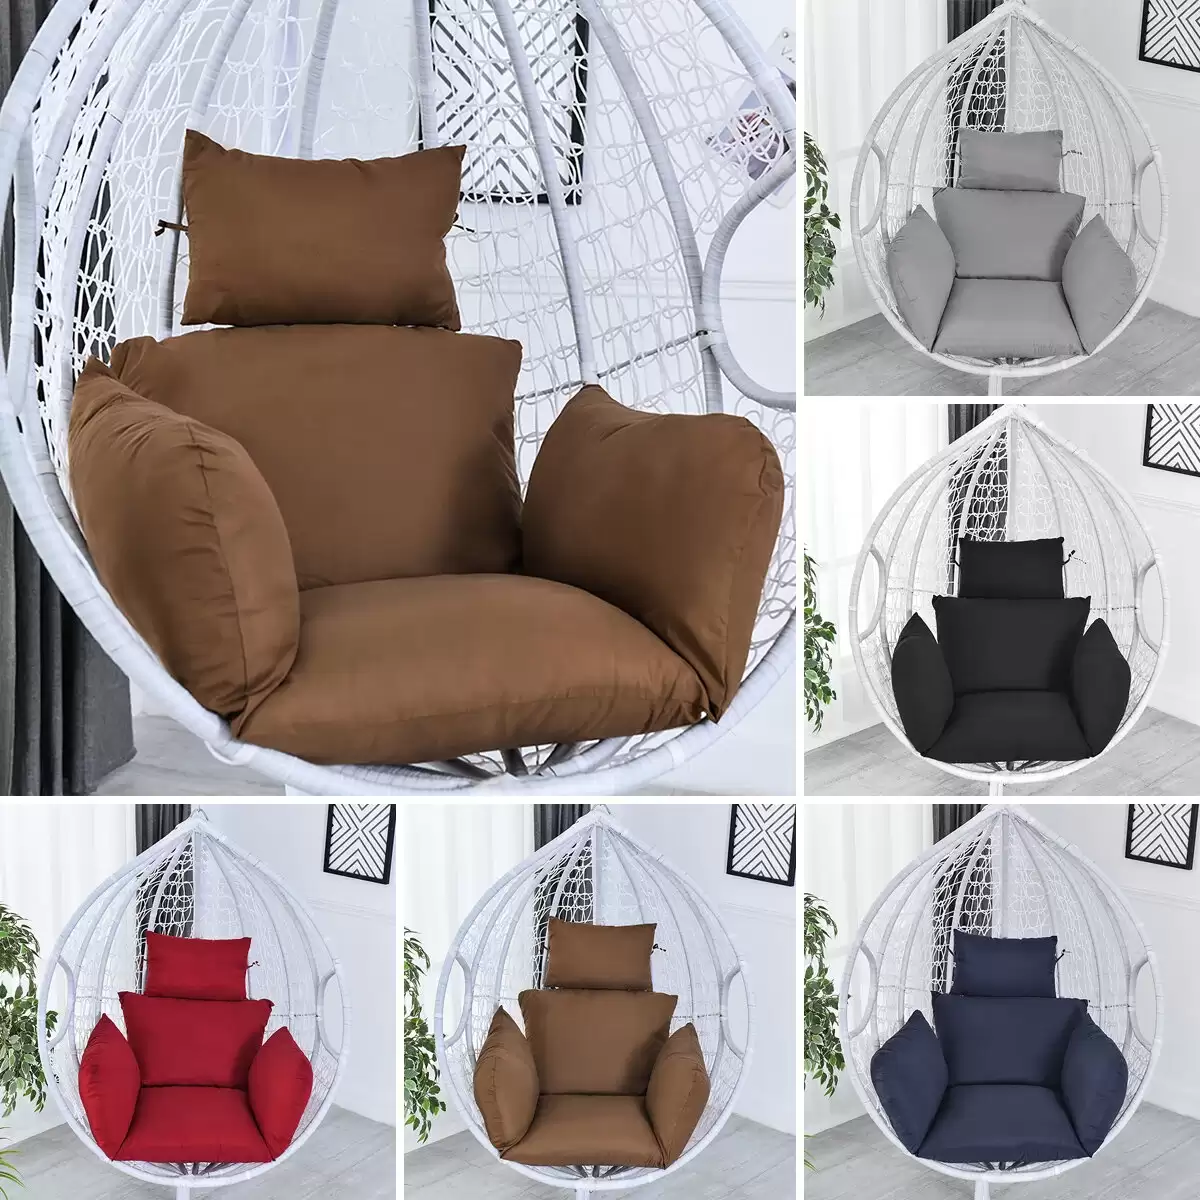 Order In Just $27.99 Hanging Egg Hammock Cradle Chair Cushion Swing Seat Thick Nest Hanging Chair Cushion With Pillow With This Coupon At Banggood